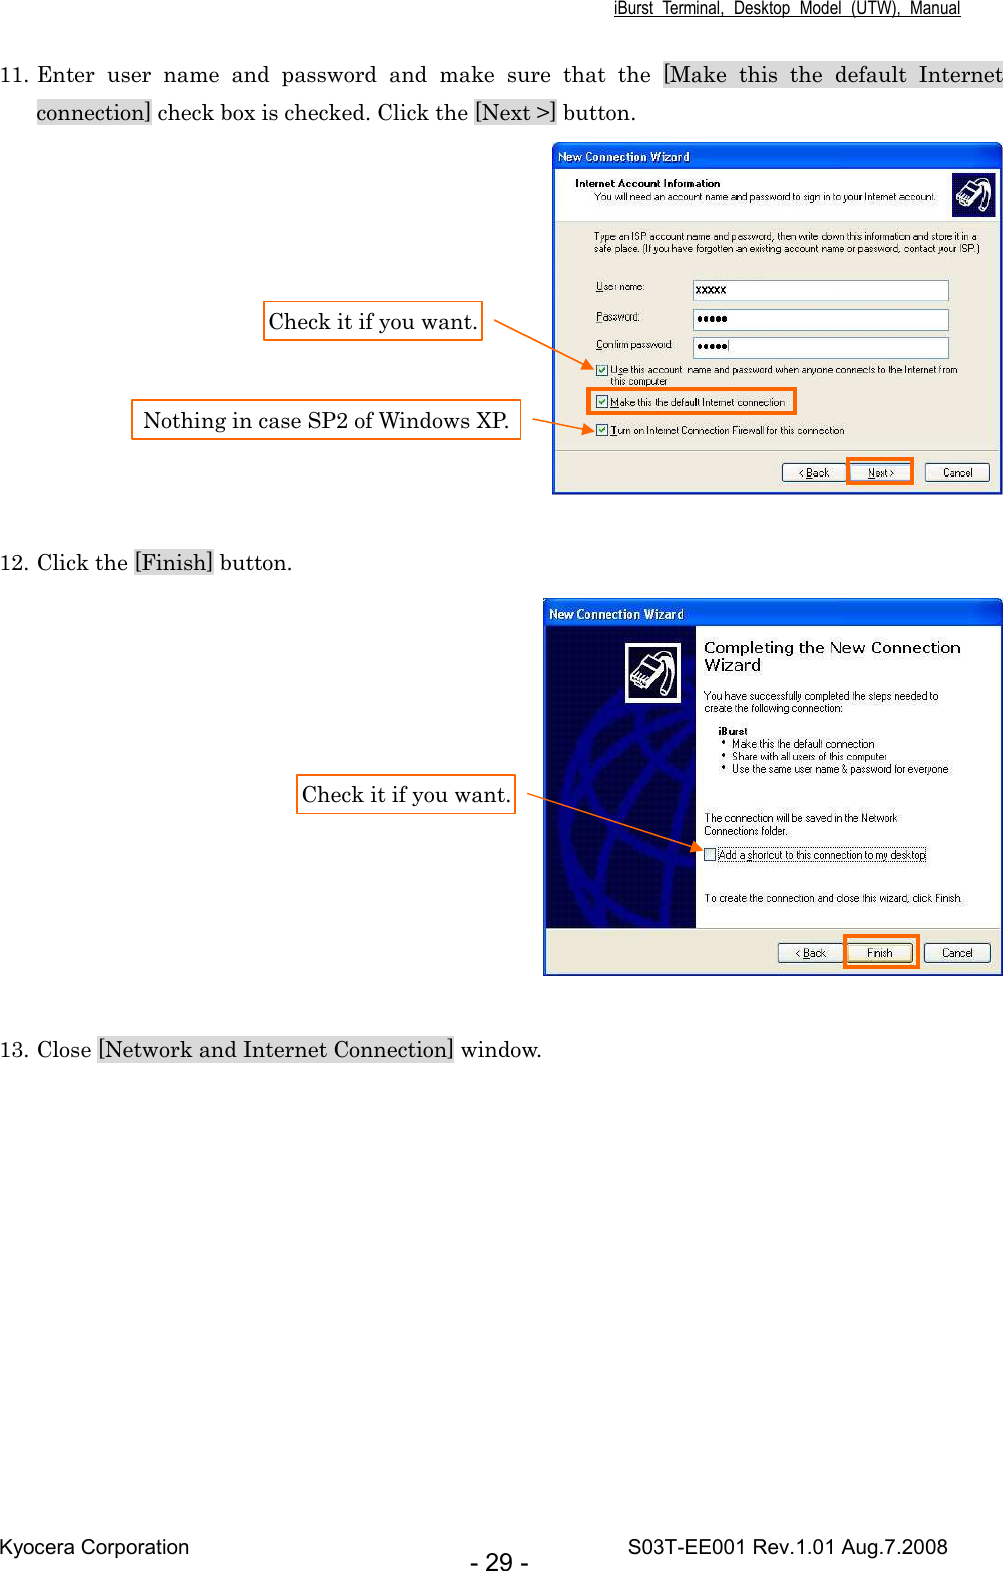 iBurst  Terminal,  Desktop  Model  (UTW),  Manual Kyocera Corporation                                                                                    S03T-EE001 Rev.1.01 Aug.7.2008 - 29 - 11. Enter  user  name  and  password  and  make  sure  that  the  [Make  this  the  default  Internet connection] check box is checked. Click the [Next &gt;] button.   12. Click the [Finish] button.   13. Close [Network and Internet Connection] window.  Check it if you want. Nothing in case SP2 of Windows XP. Check it if you want. 